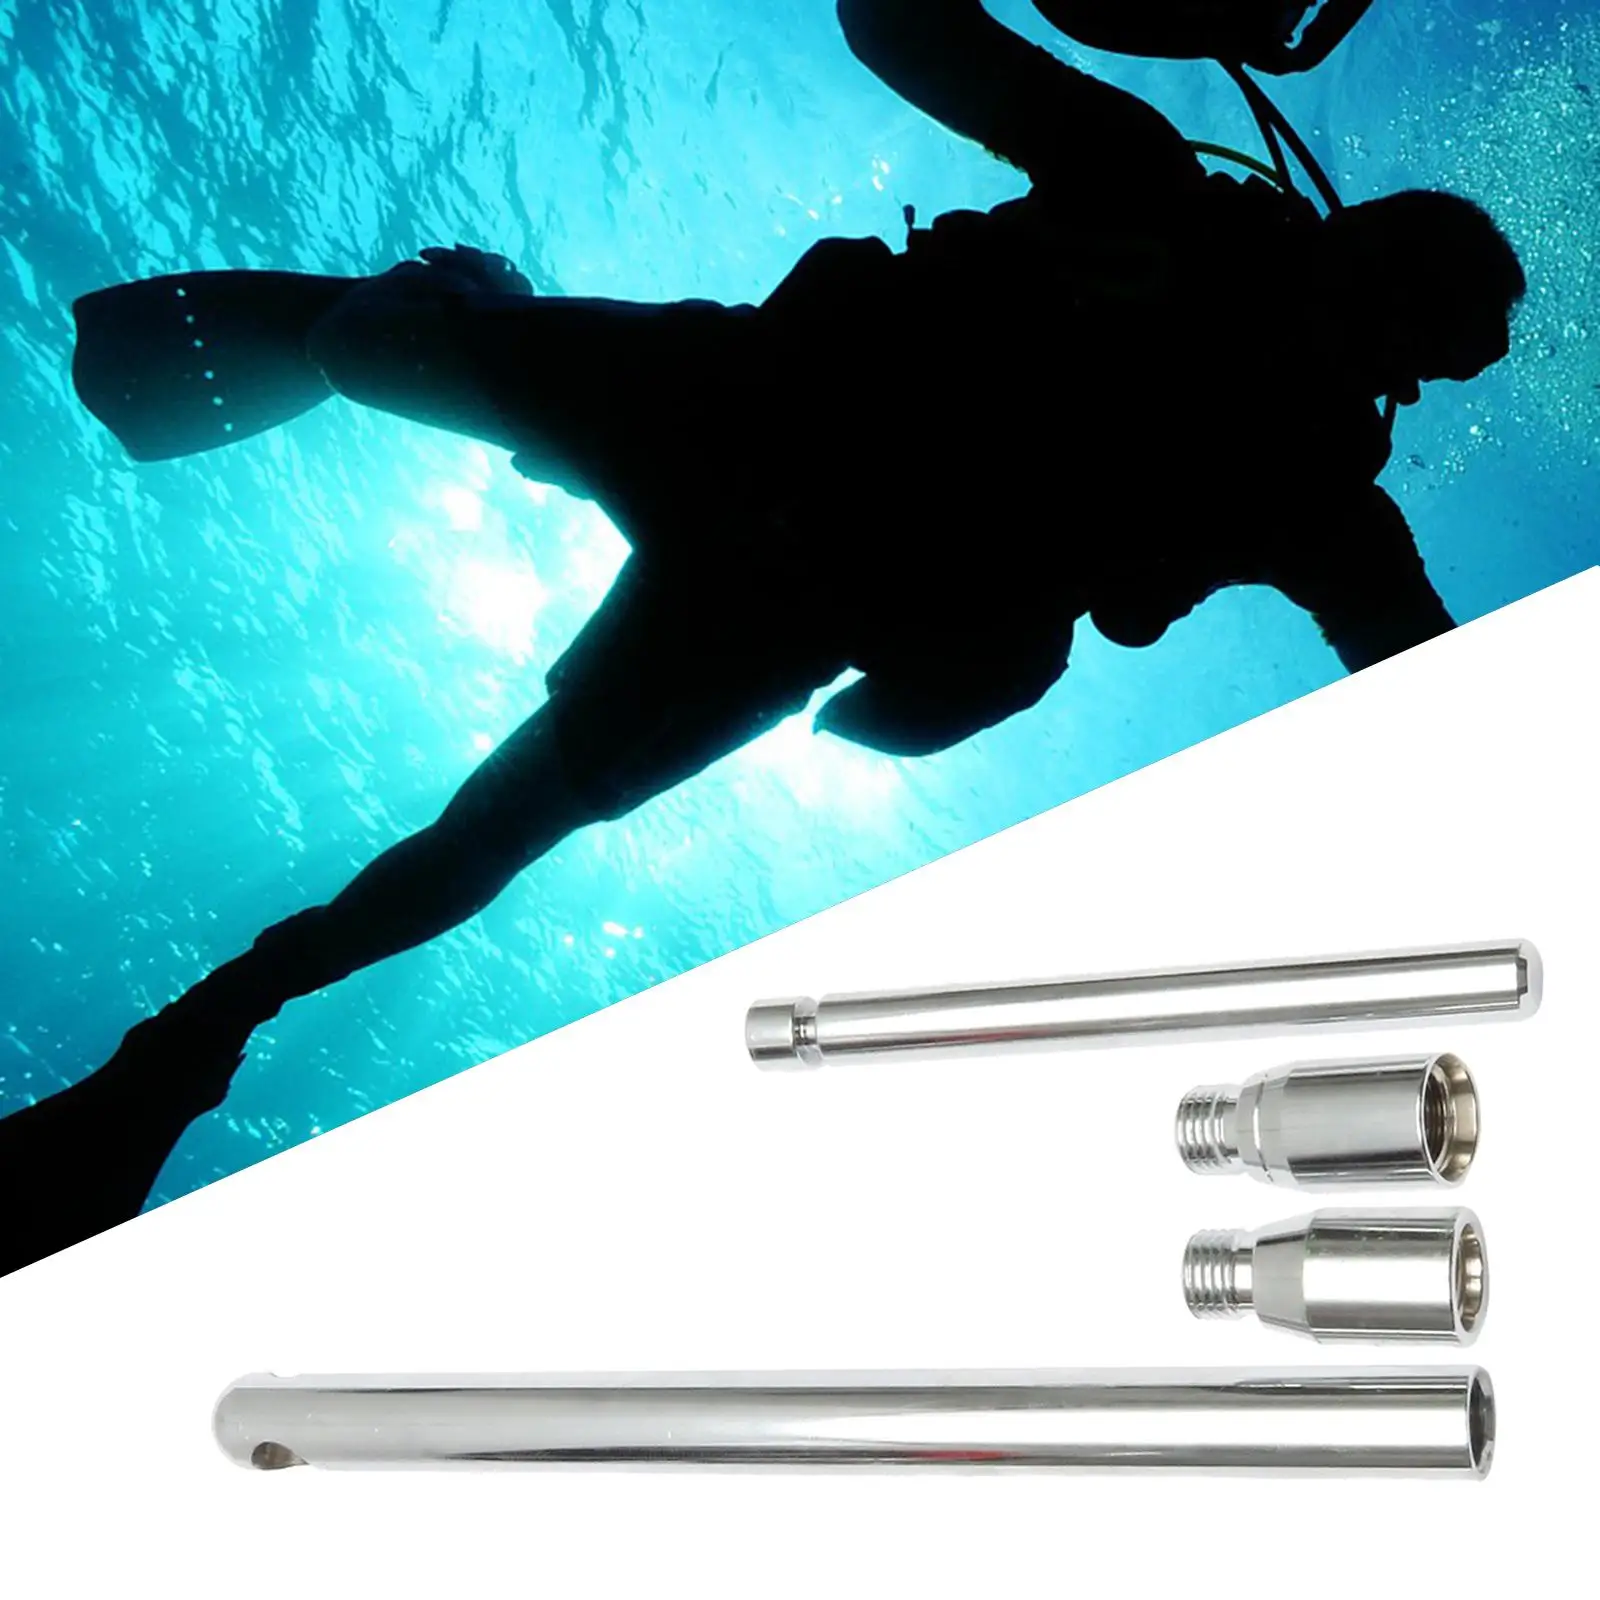 Hose Protector Tool Low Pressure Stainless Steel for Scuba Diving Self Draining Accessories